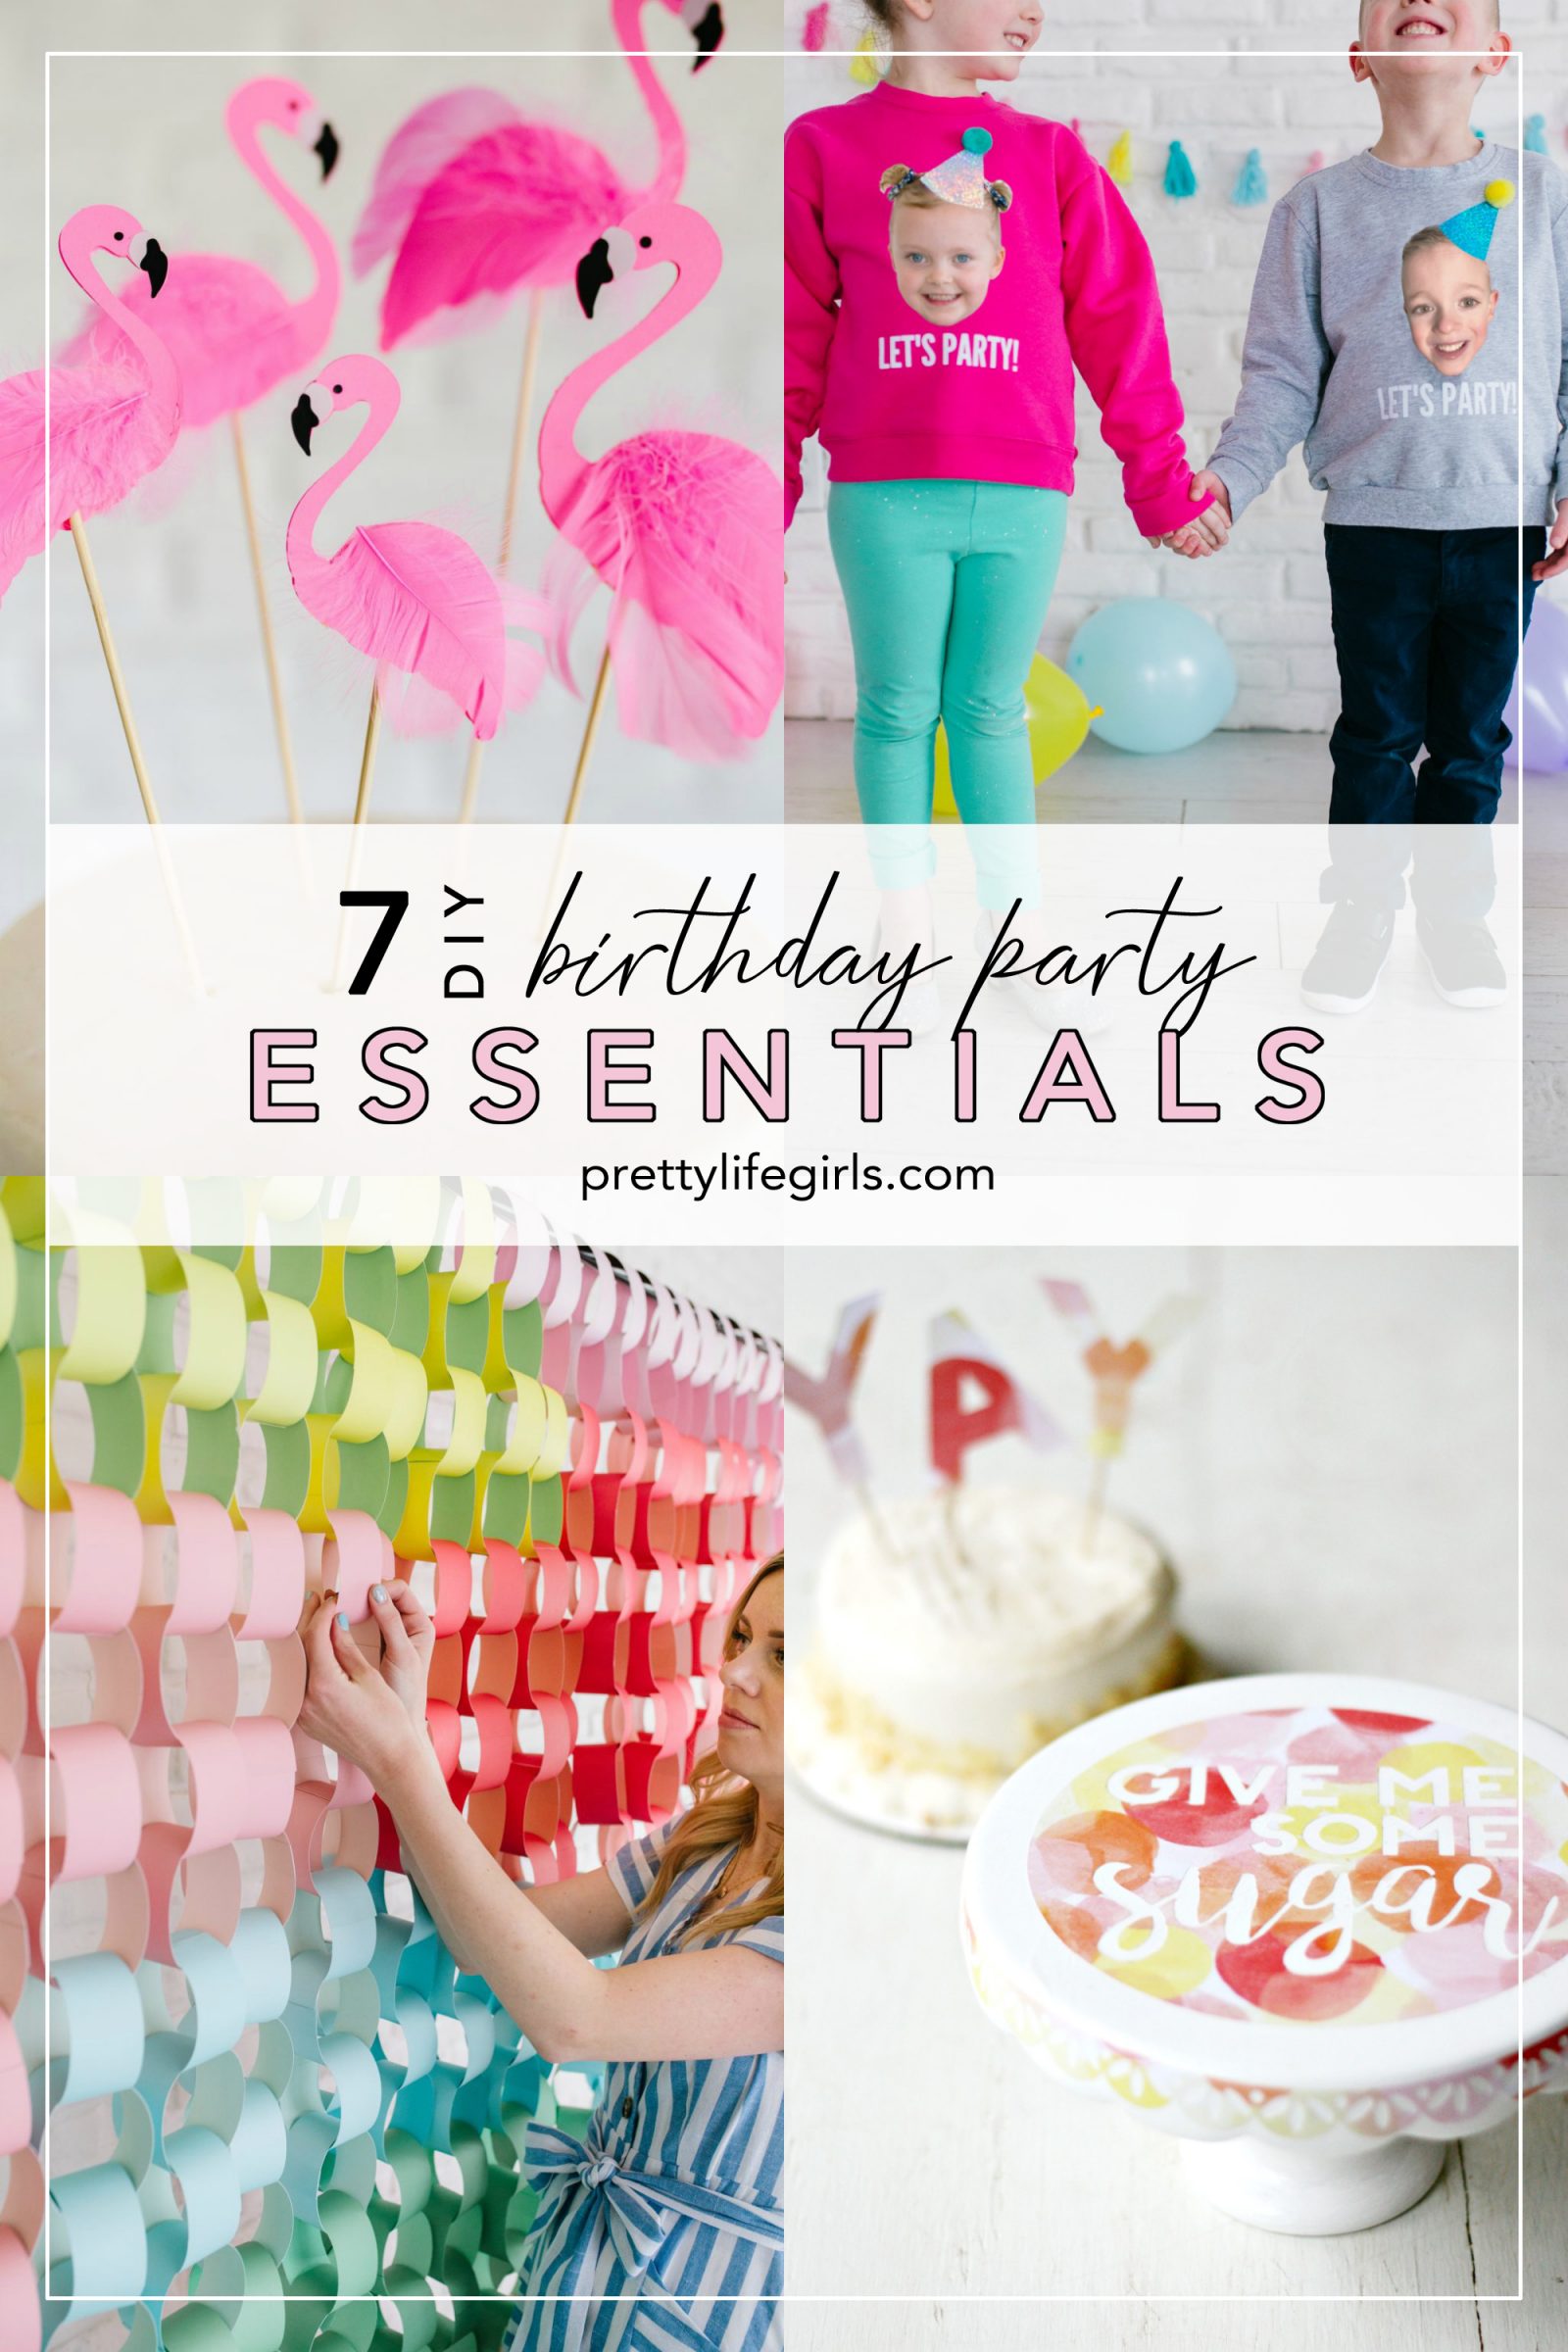 7 DIY Birthday Party Essentials You Can Make by Yourself + a tutorial featured by Top US Craft Blog + The Pretty Life Girls